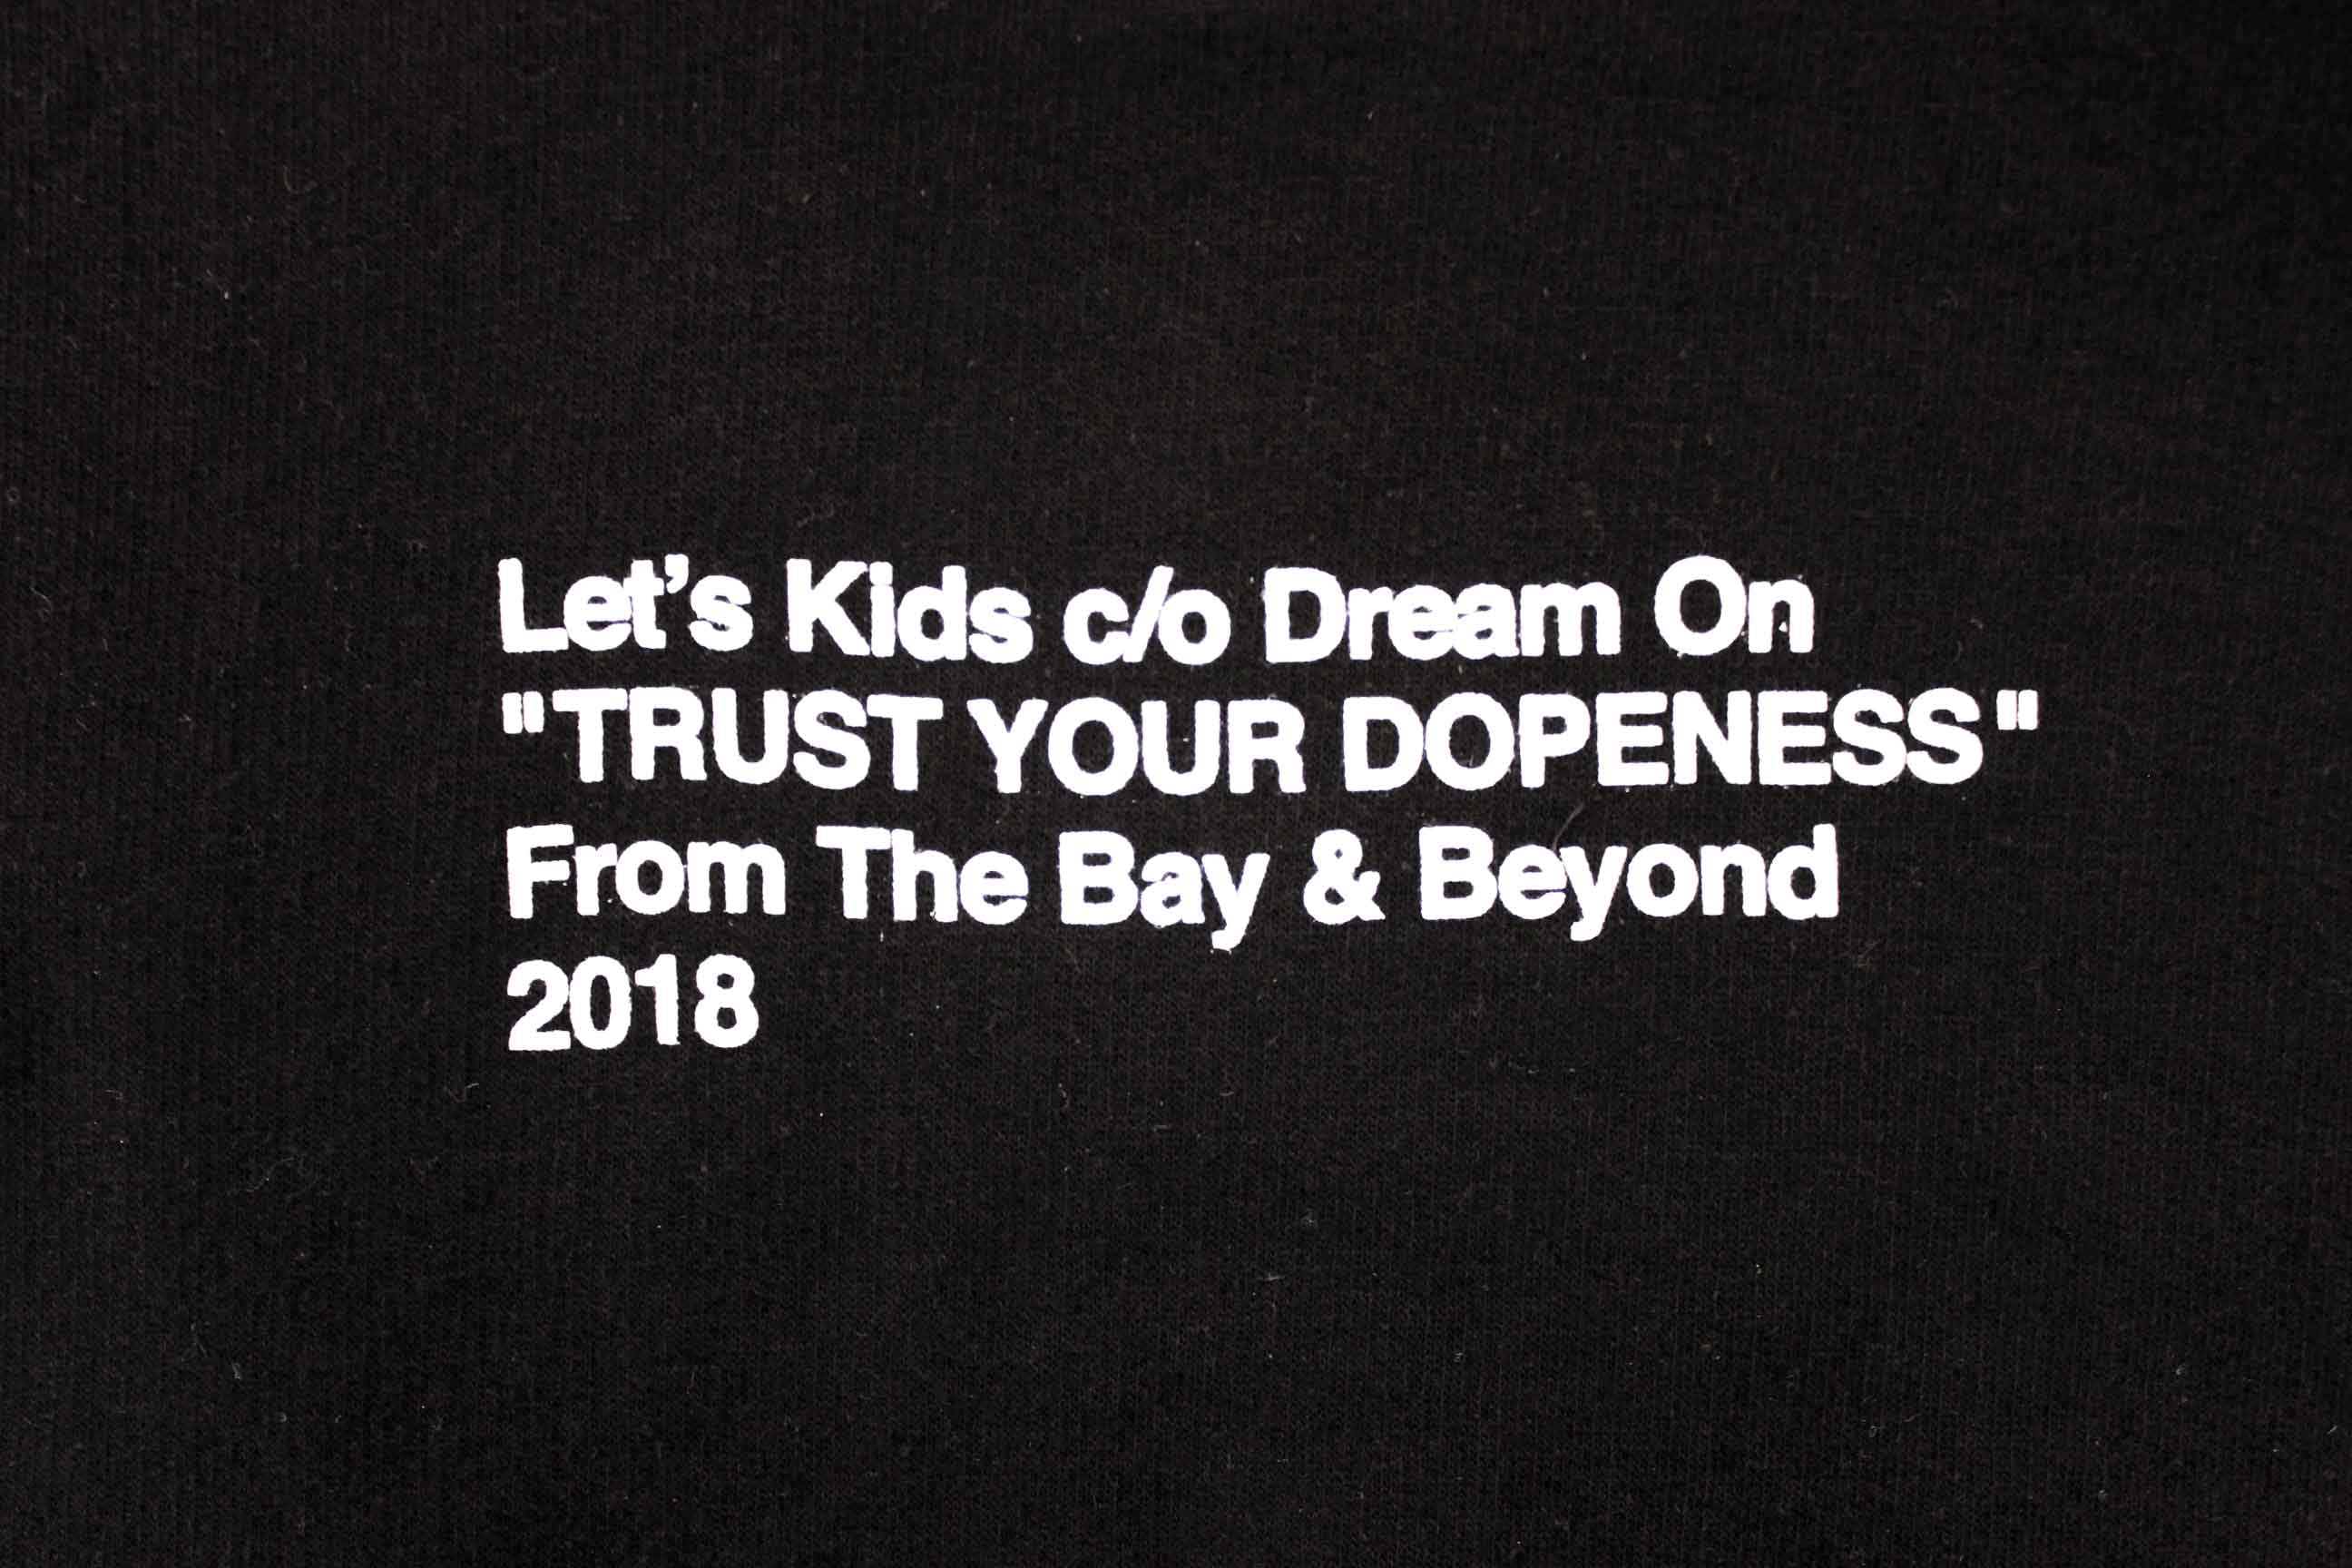 DREAM ON x LET'S KIDS: "TRUST YOUR DOPENESS"